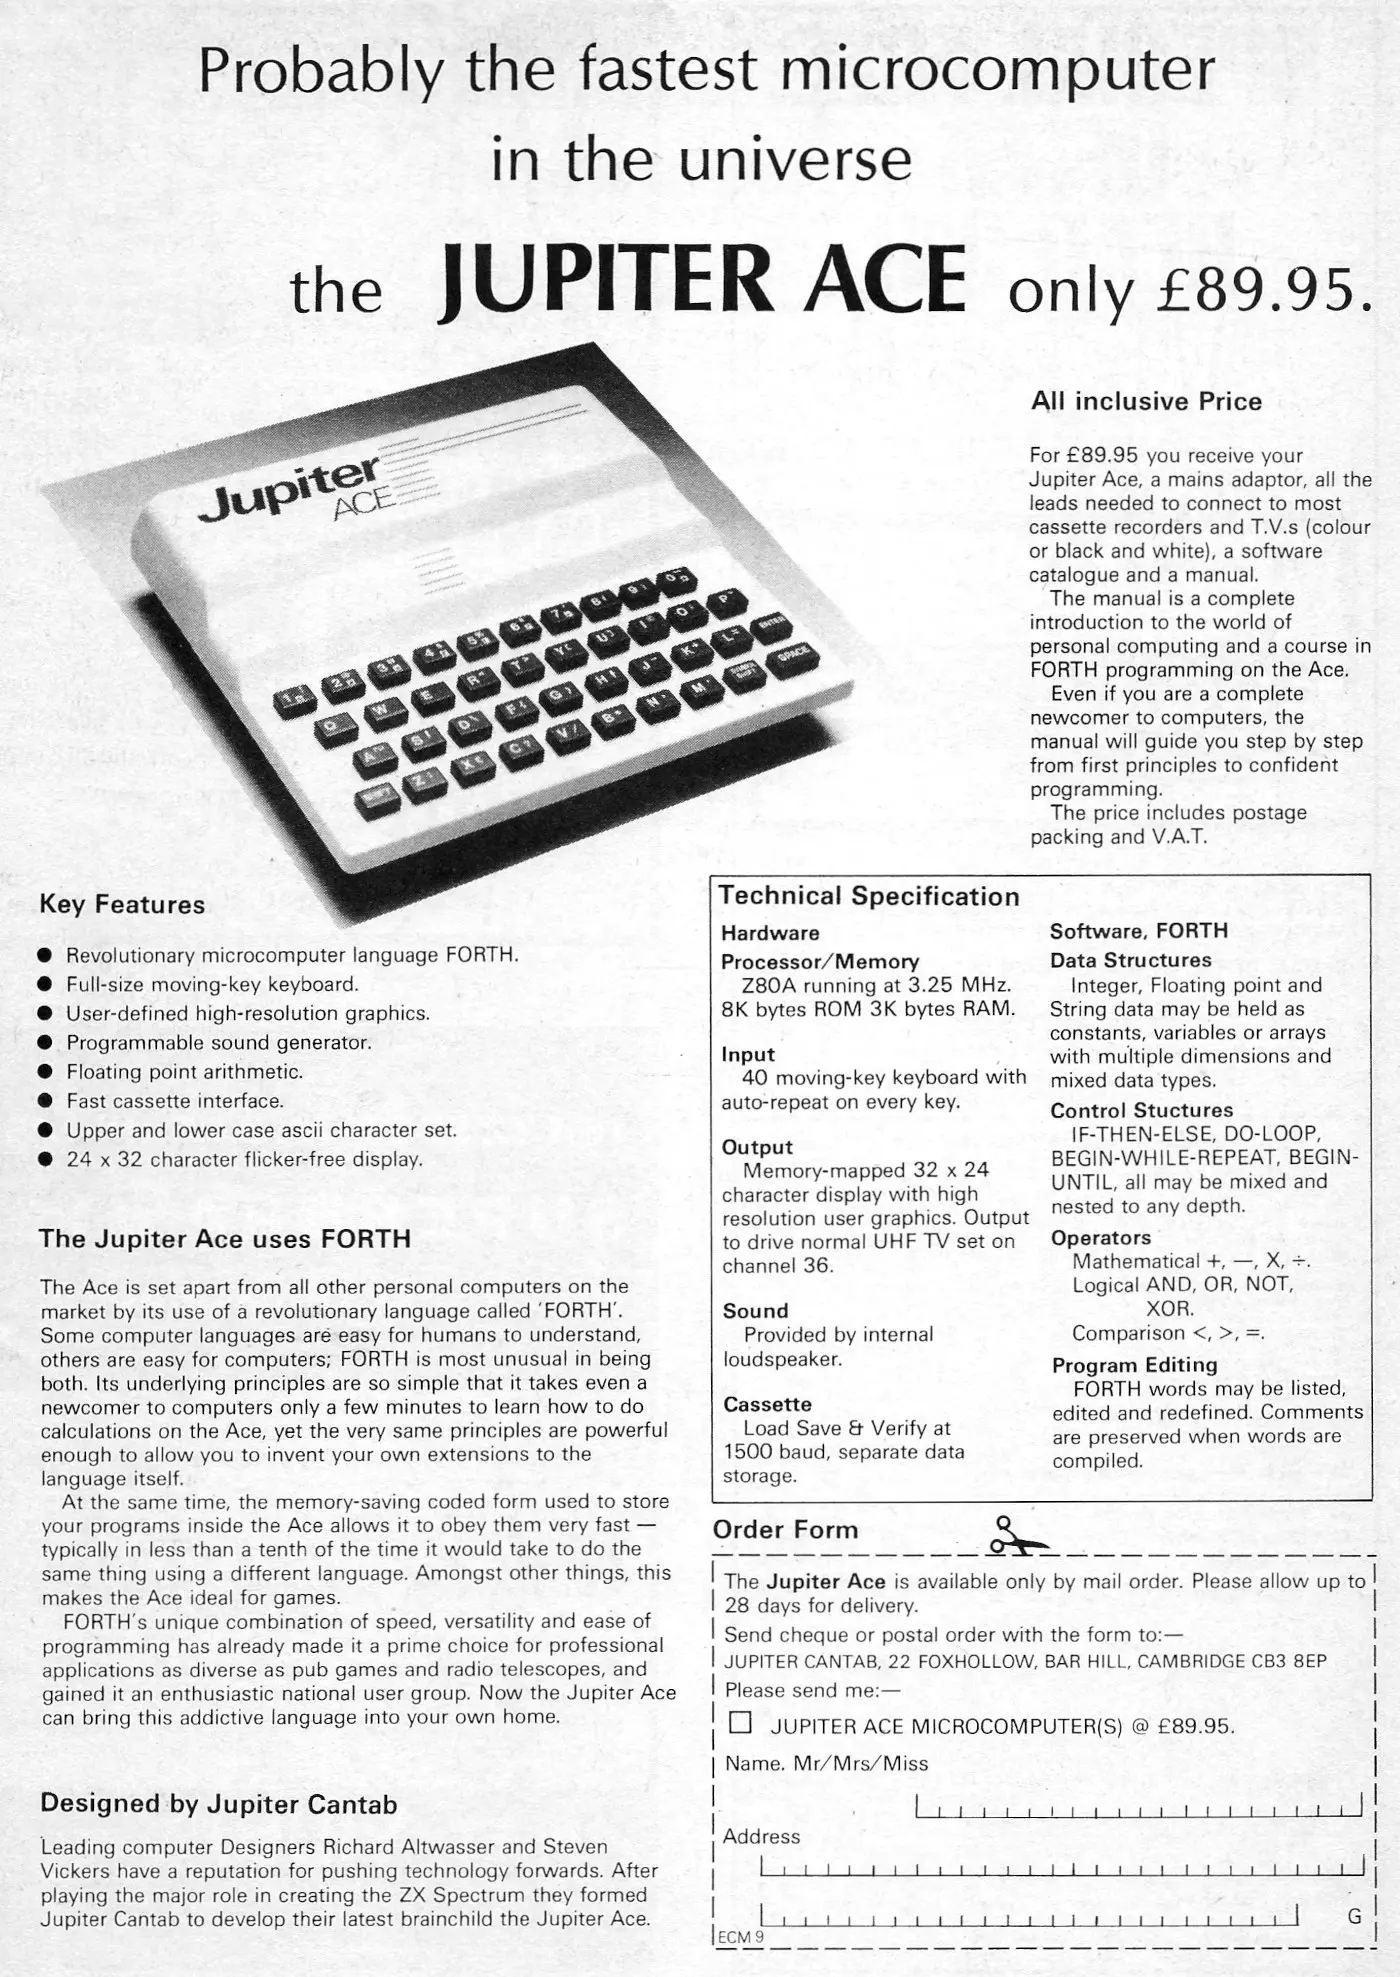 Jupiter Cantab Advert: Probably the fastest computer in the universe - the Jupiter Ace, from Your Computer, September 1982